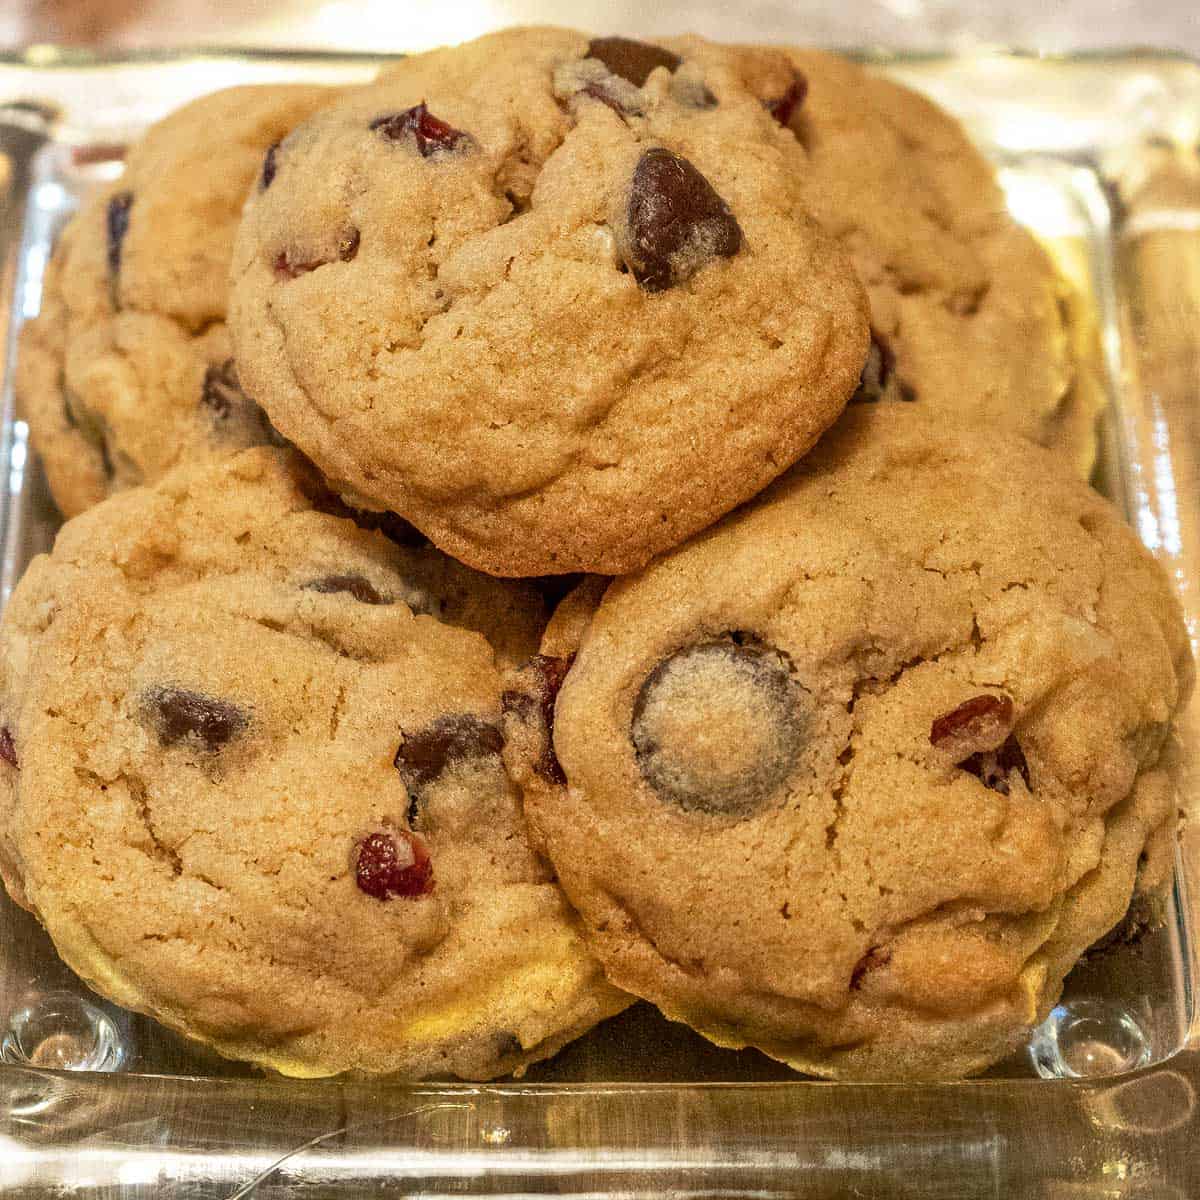 Cranberry and bittersweet chocolate chip cookies on a glass dish.